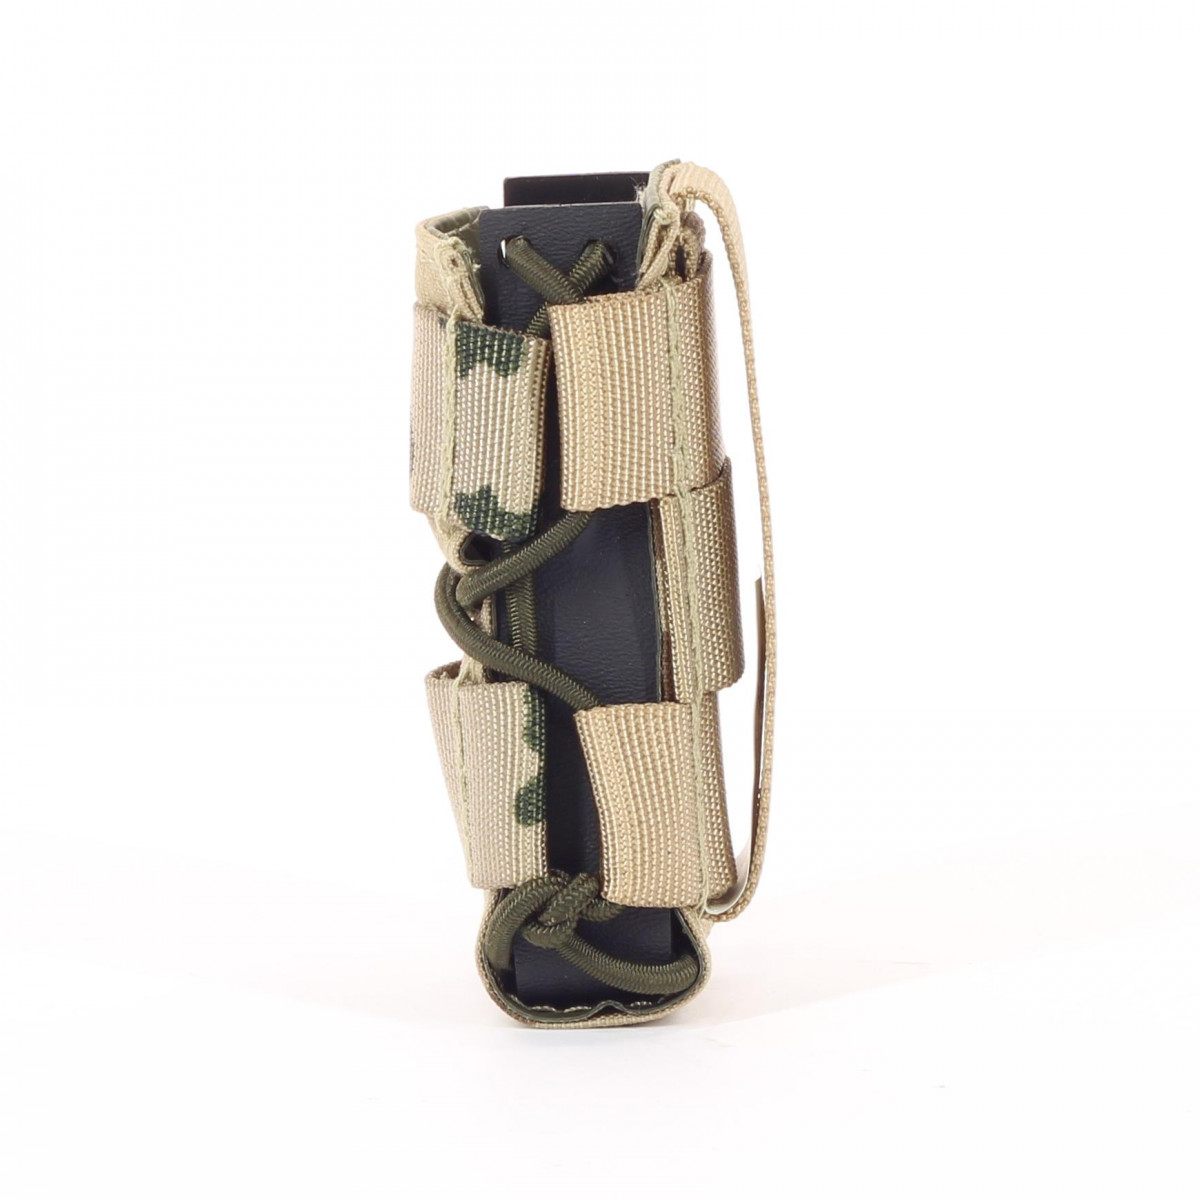 Quick-draw magazine pouch P8 in tropical camouflage